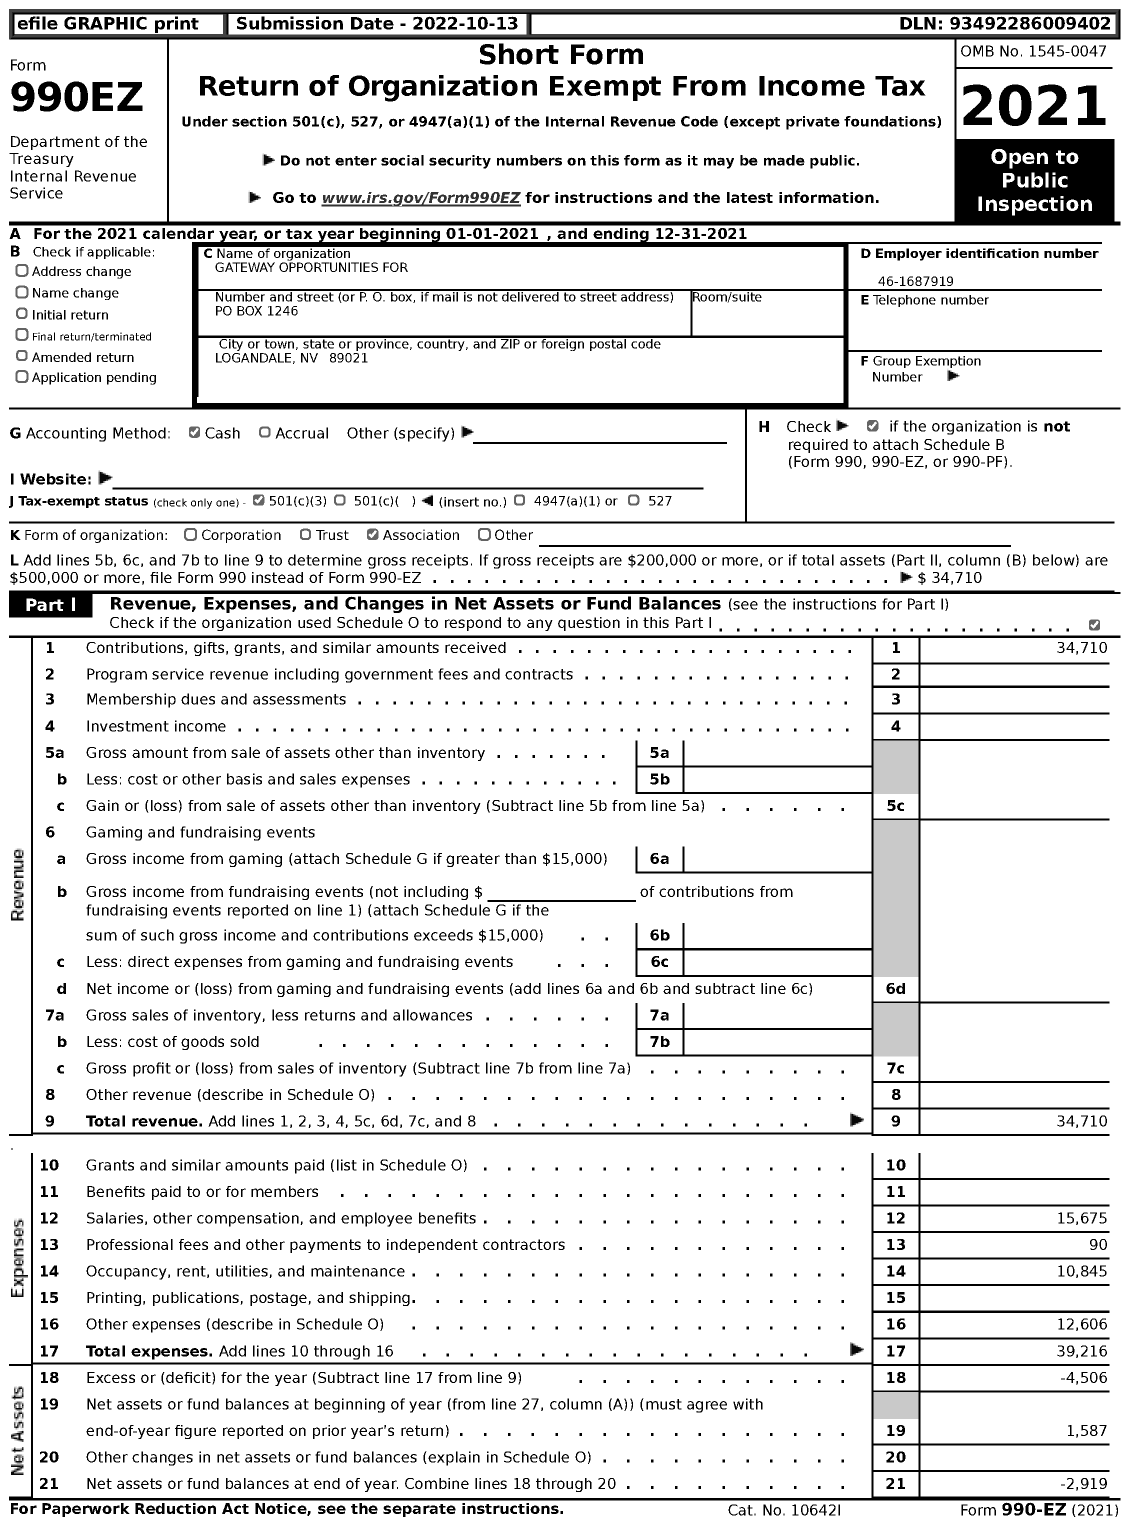 Image of first page of 2021 Form 990EZ for Gateway Opportunities for